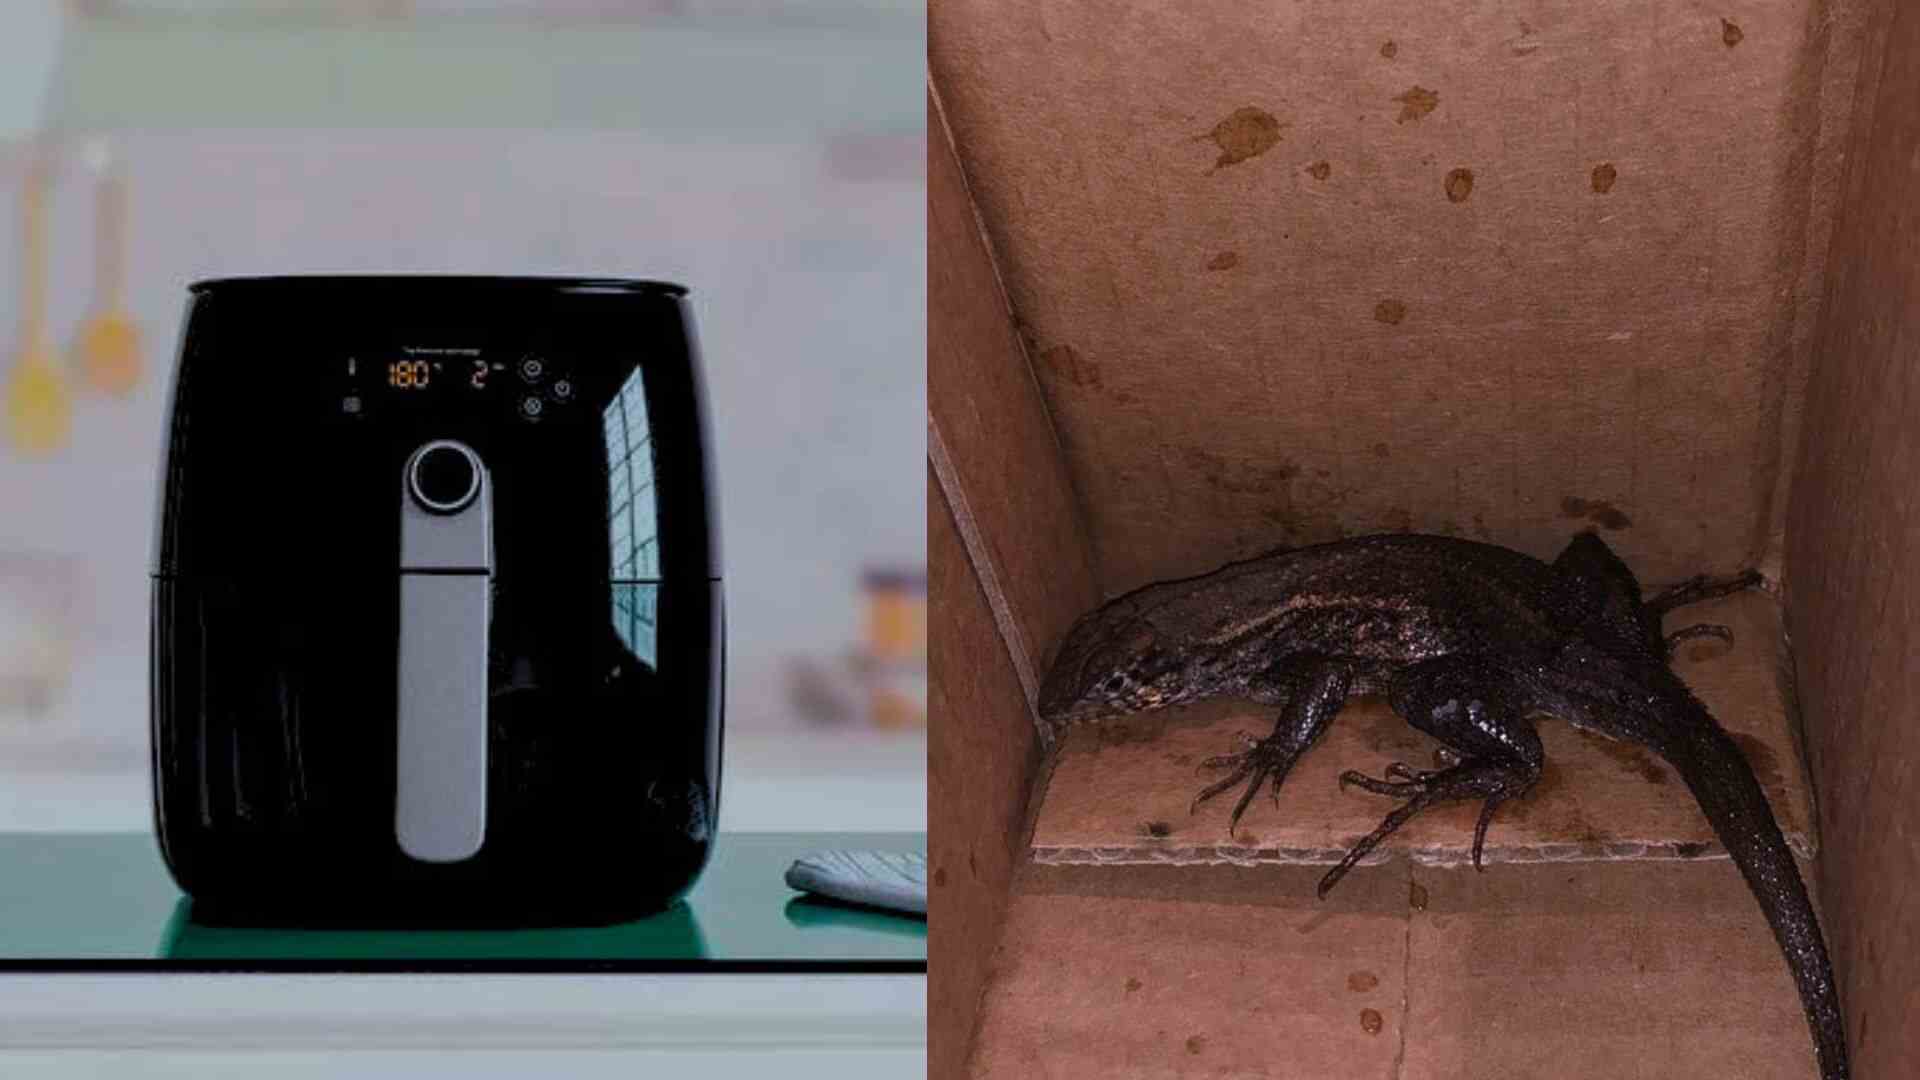 Unexpected Delivery: Colombian Woman Finds Lizard Instead Of Air Fryer From Amazon